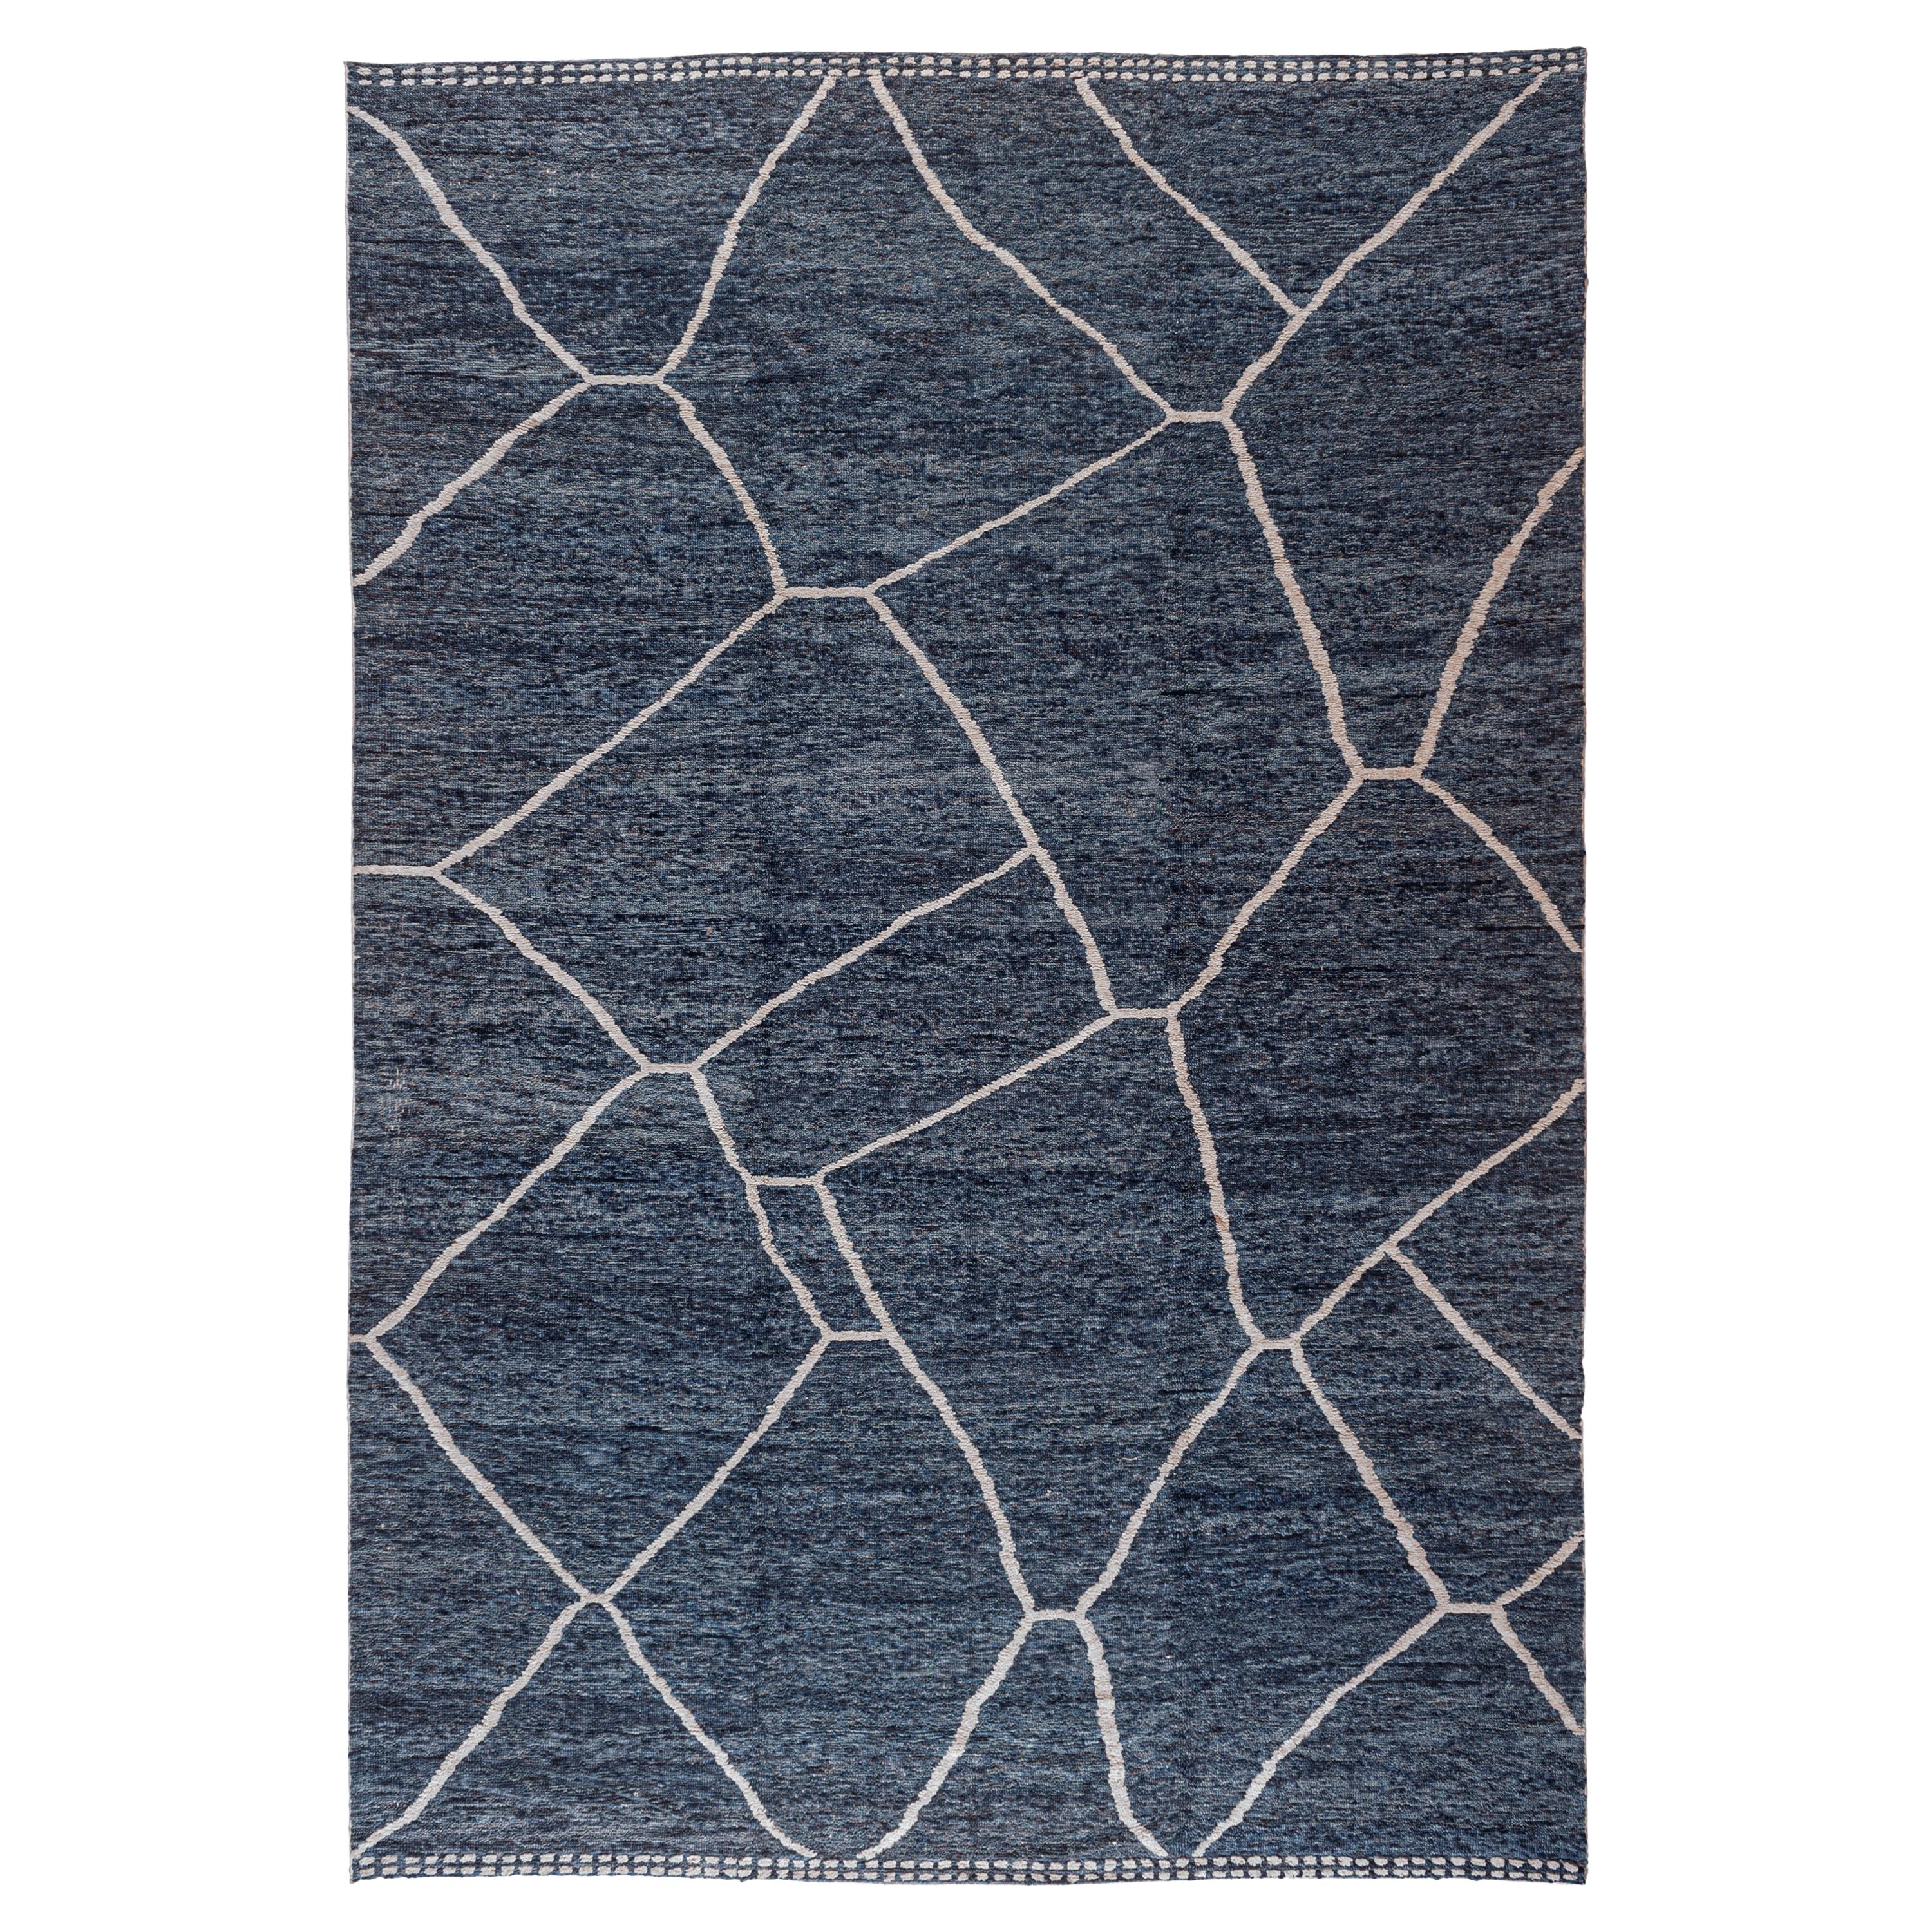 Blue Moroccan Inspired Rug For Sale